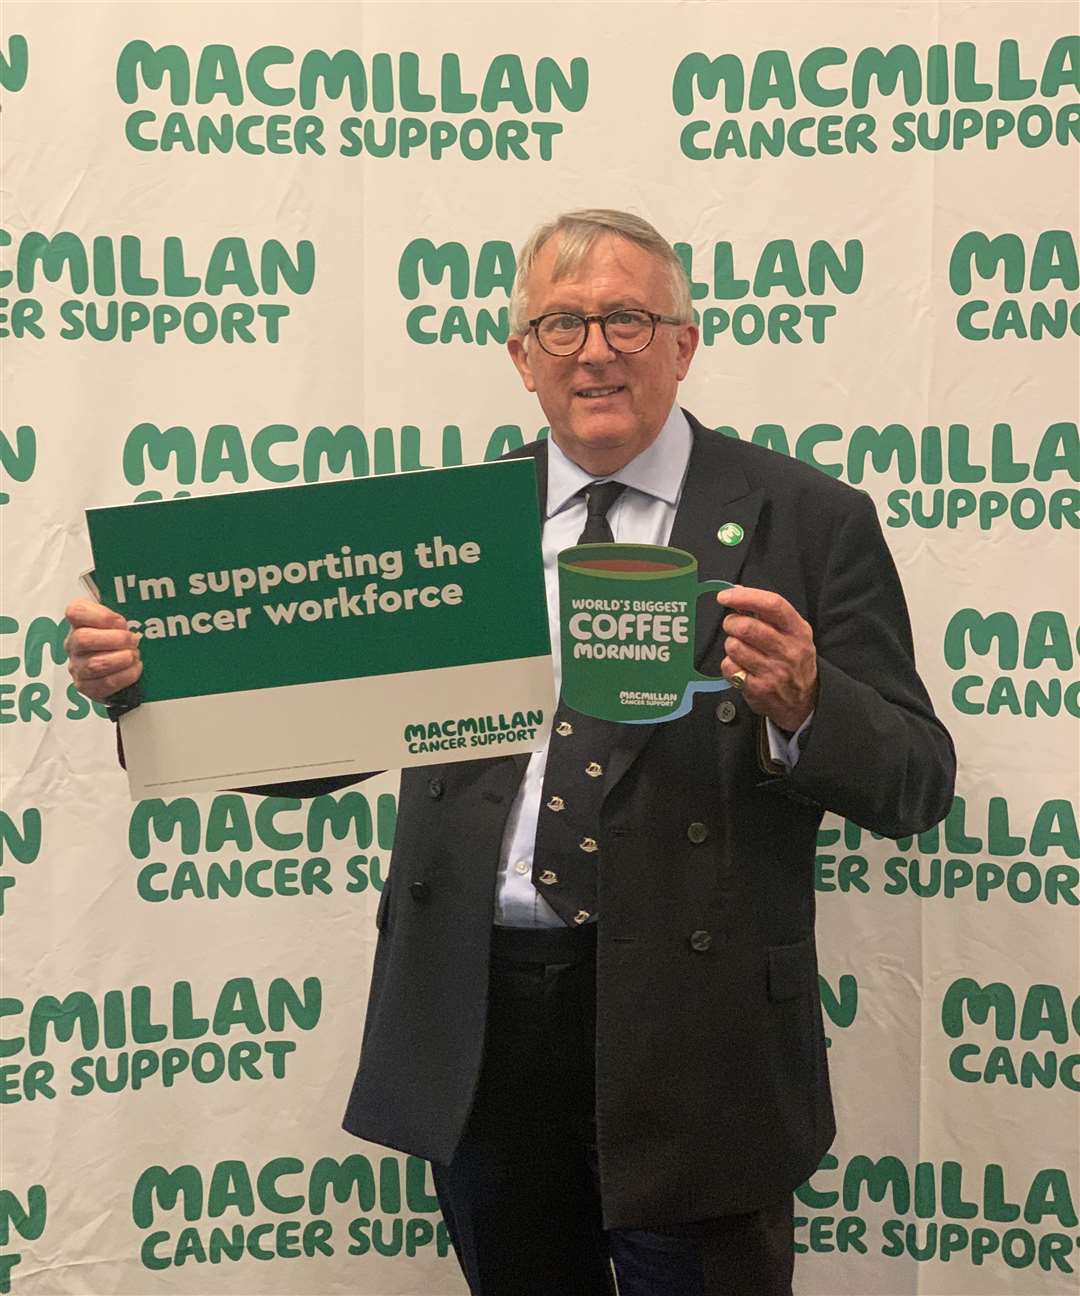 Jamie Stone praised the 'fantastic' work of Macmillan Cancer Support.